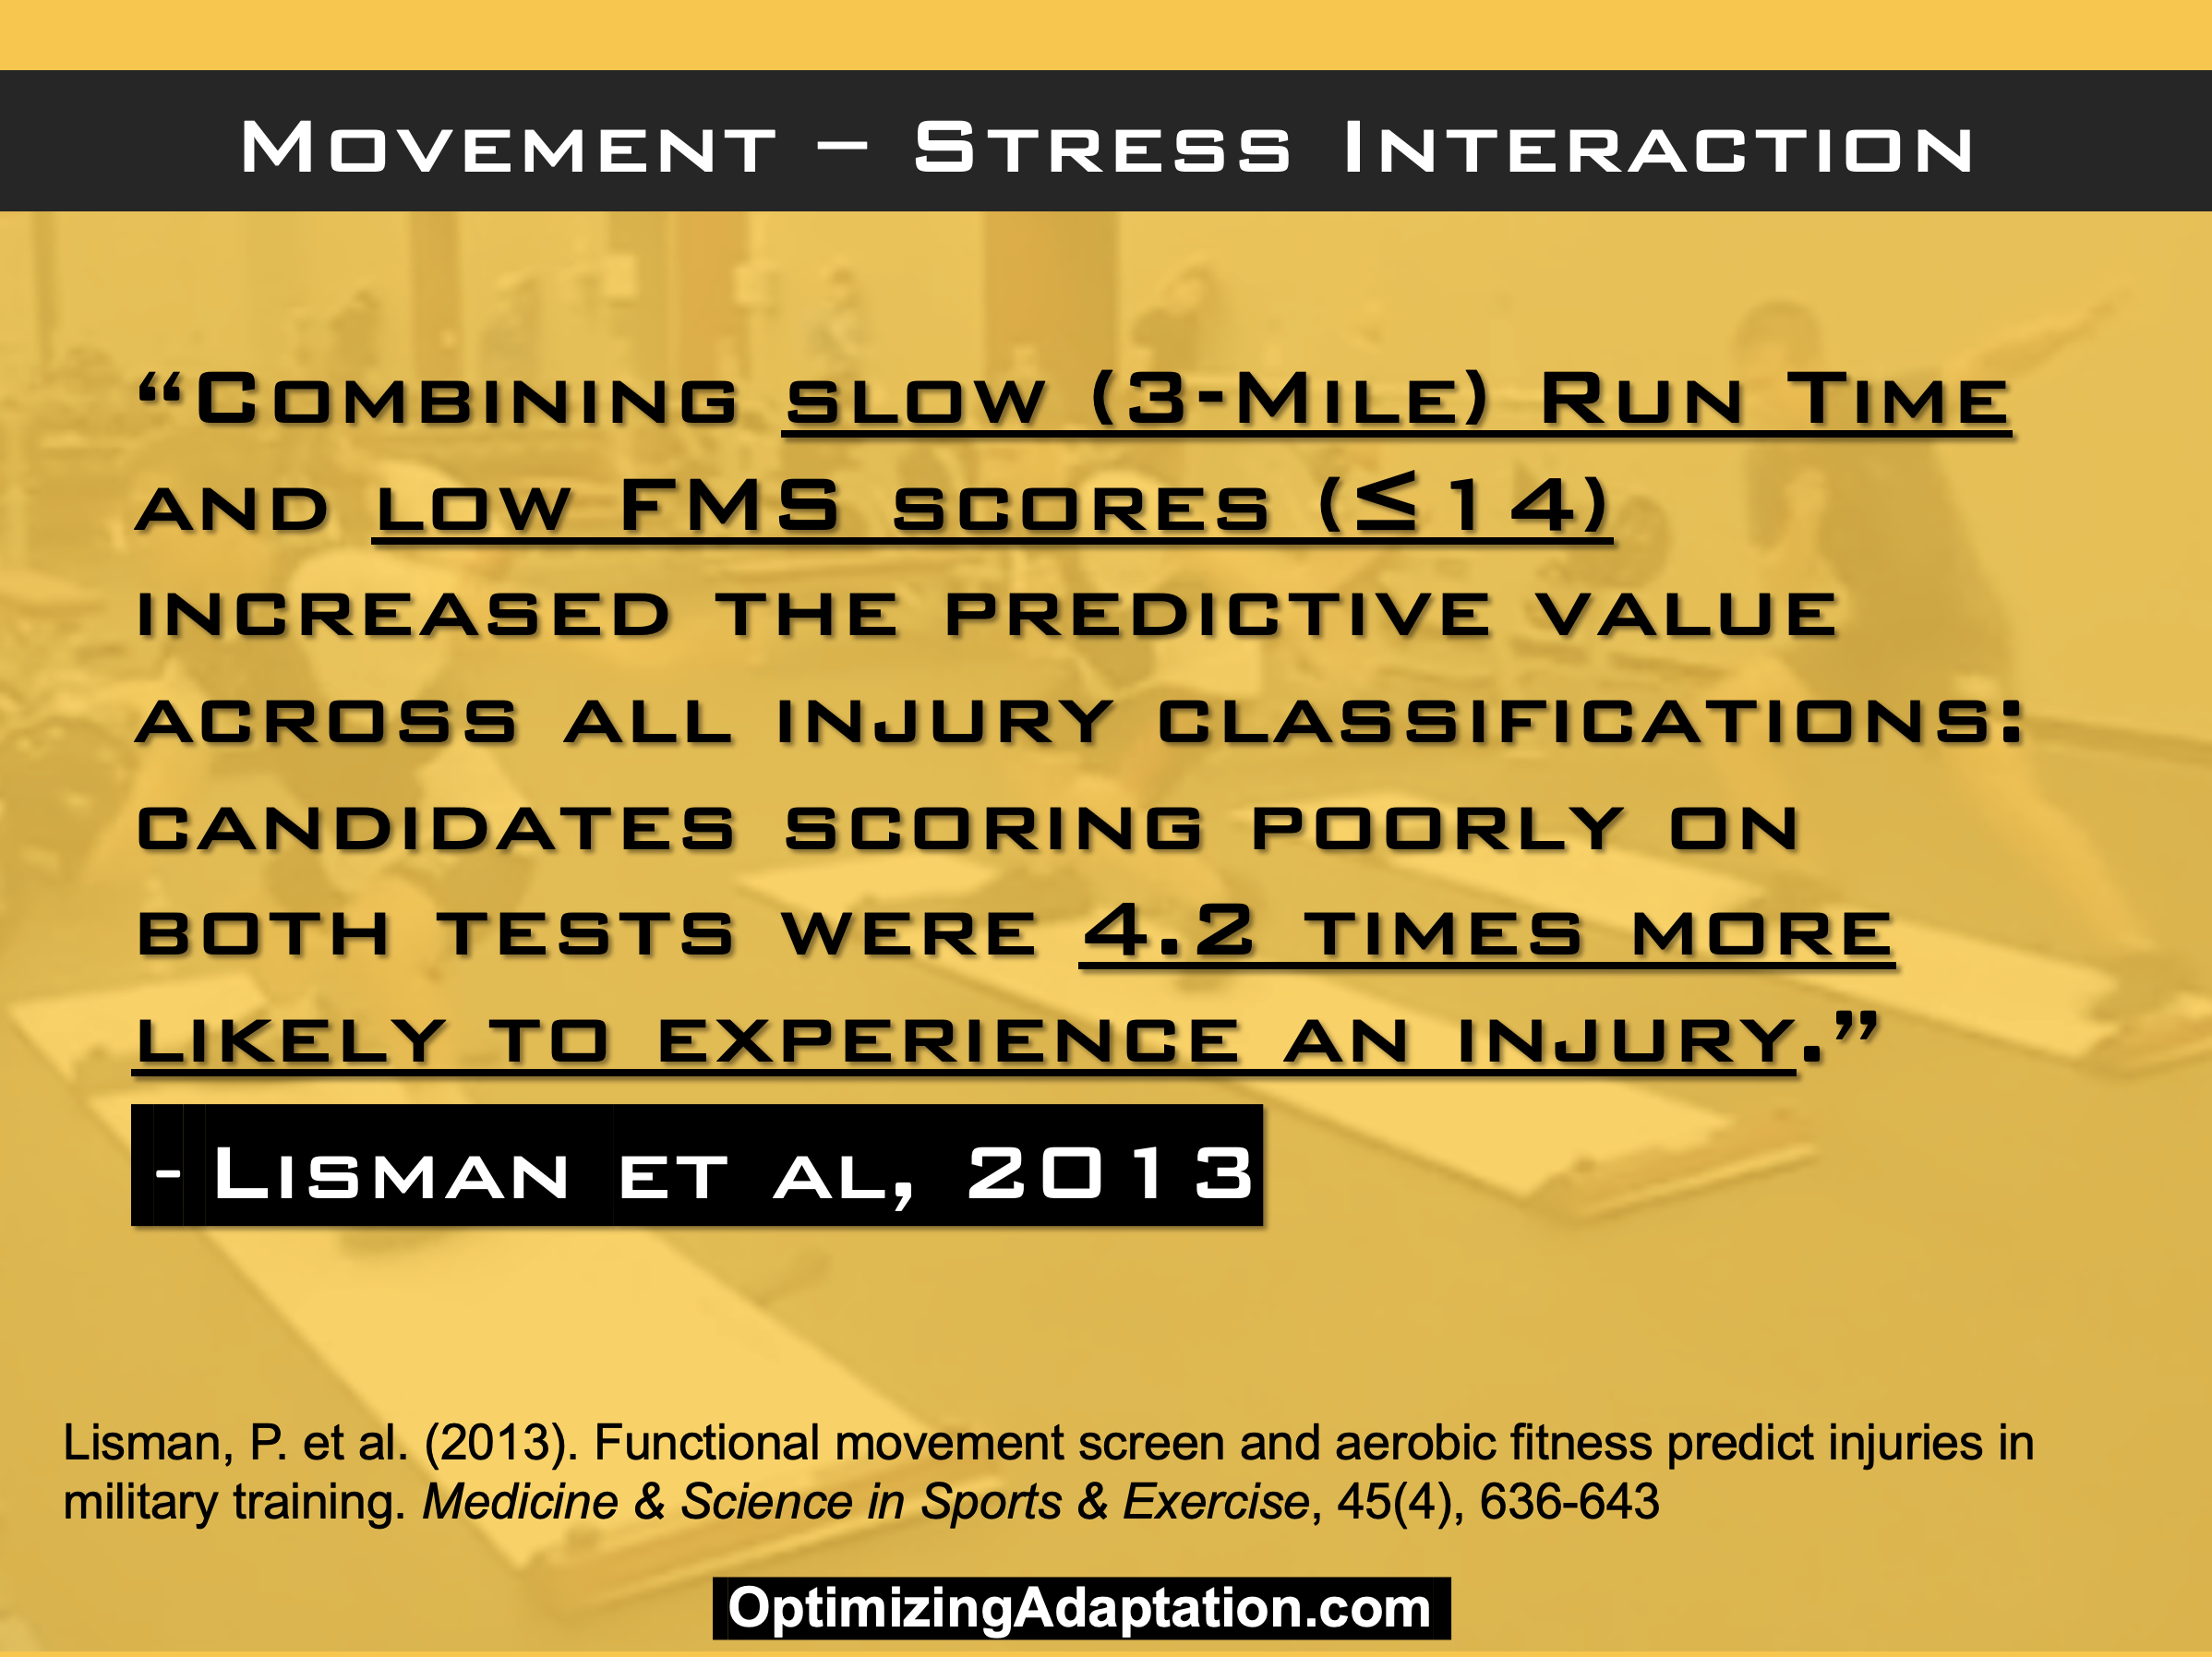 Movement, Stress, and Injury Risk